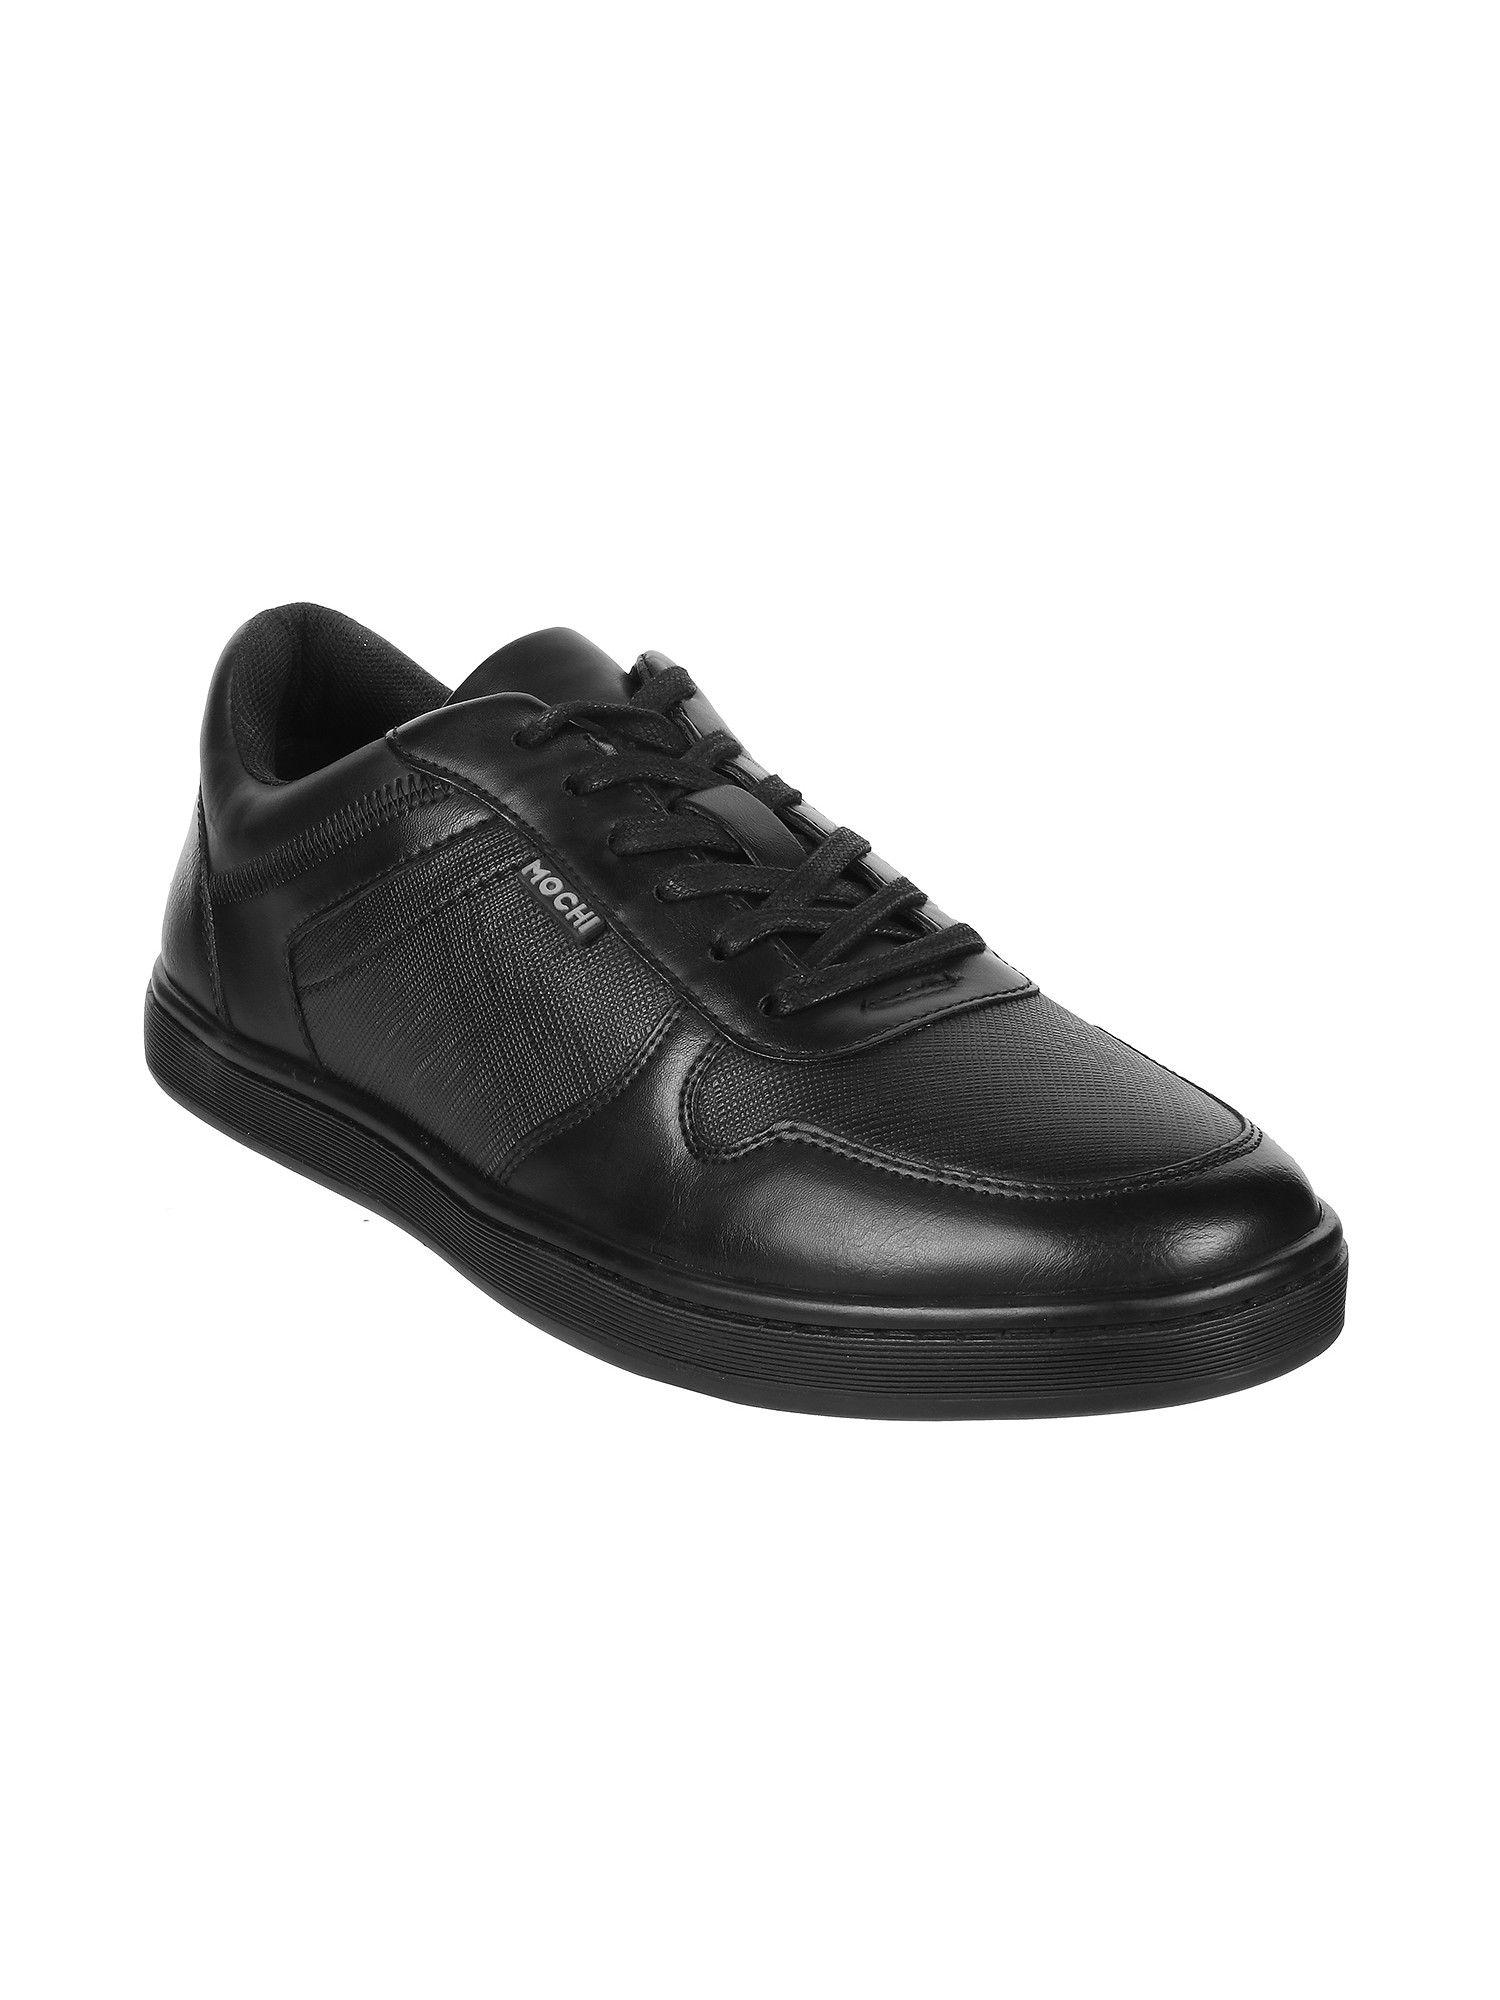 mens-black-sneakers-mochi-mens-black-synthetic-solid-plain-casual-shoes